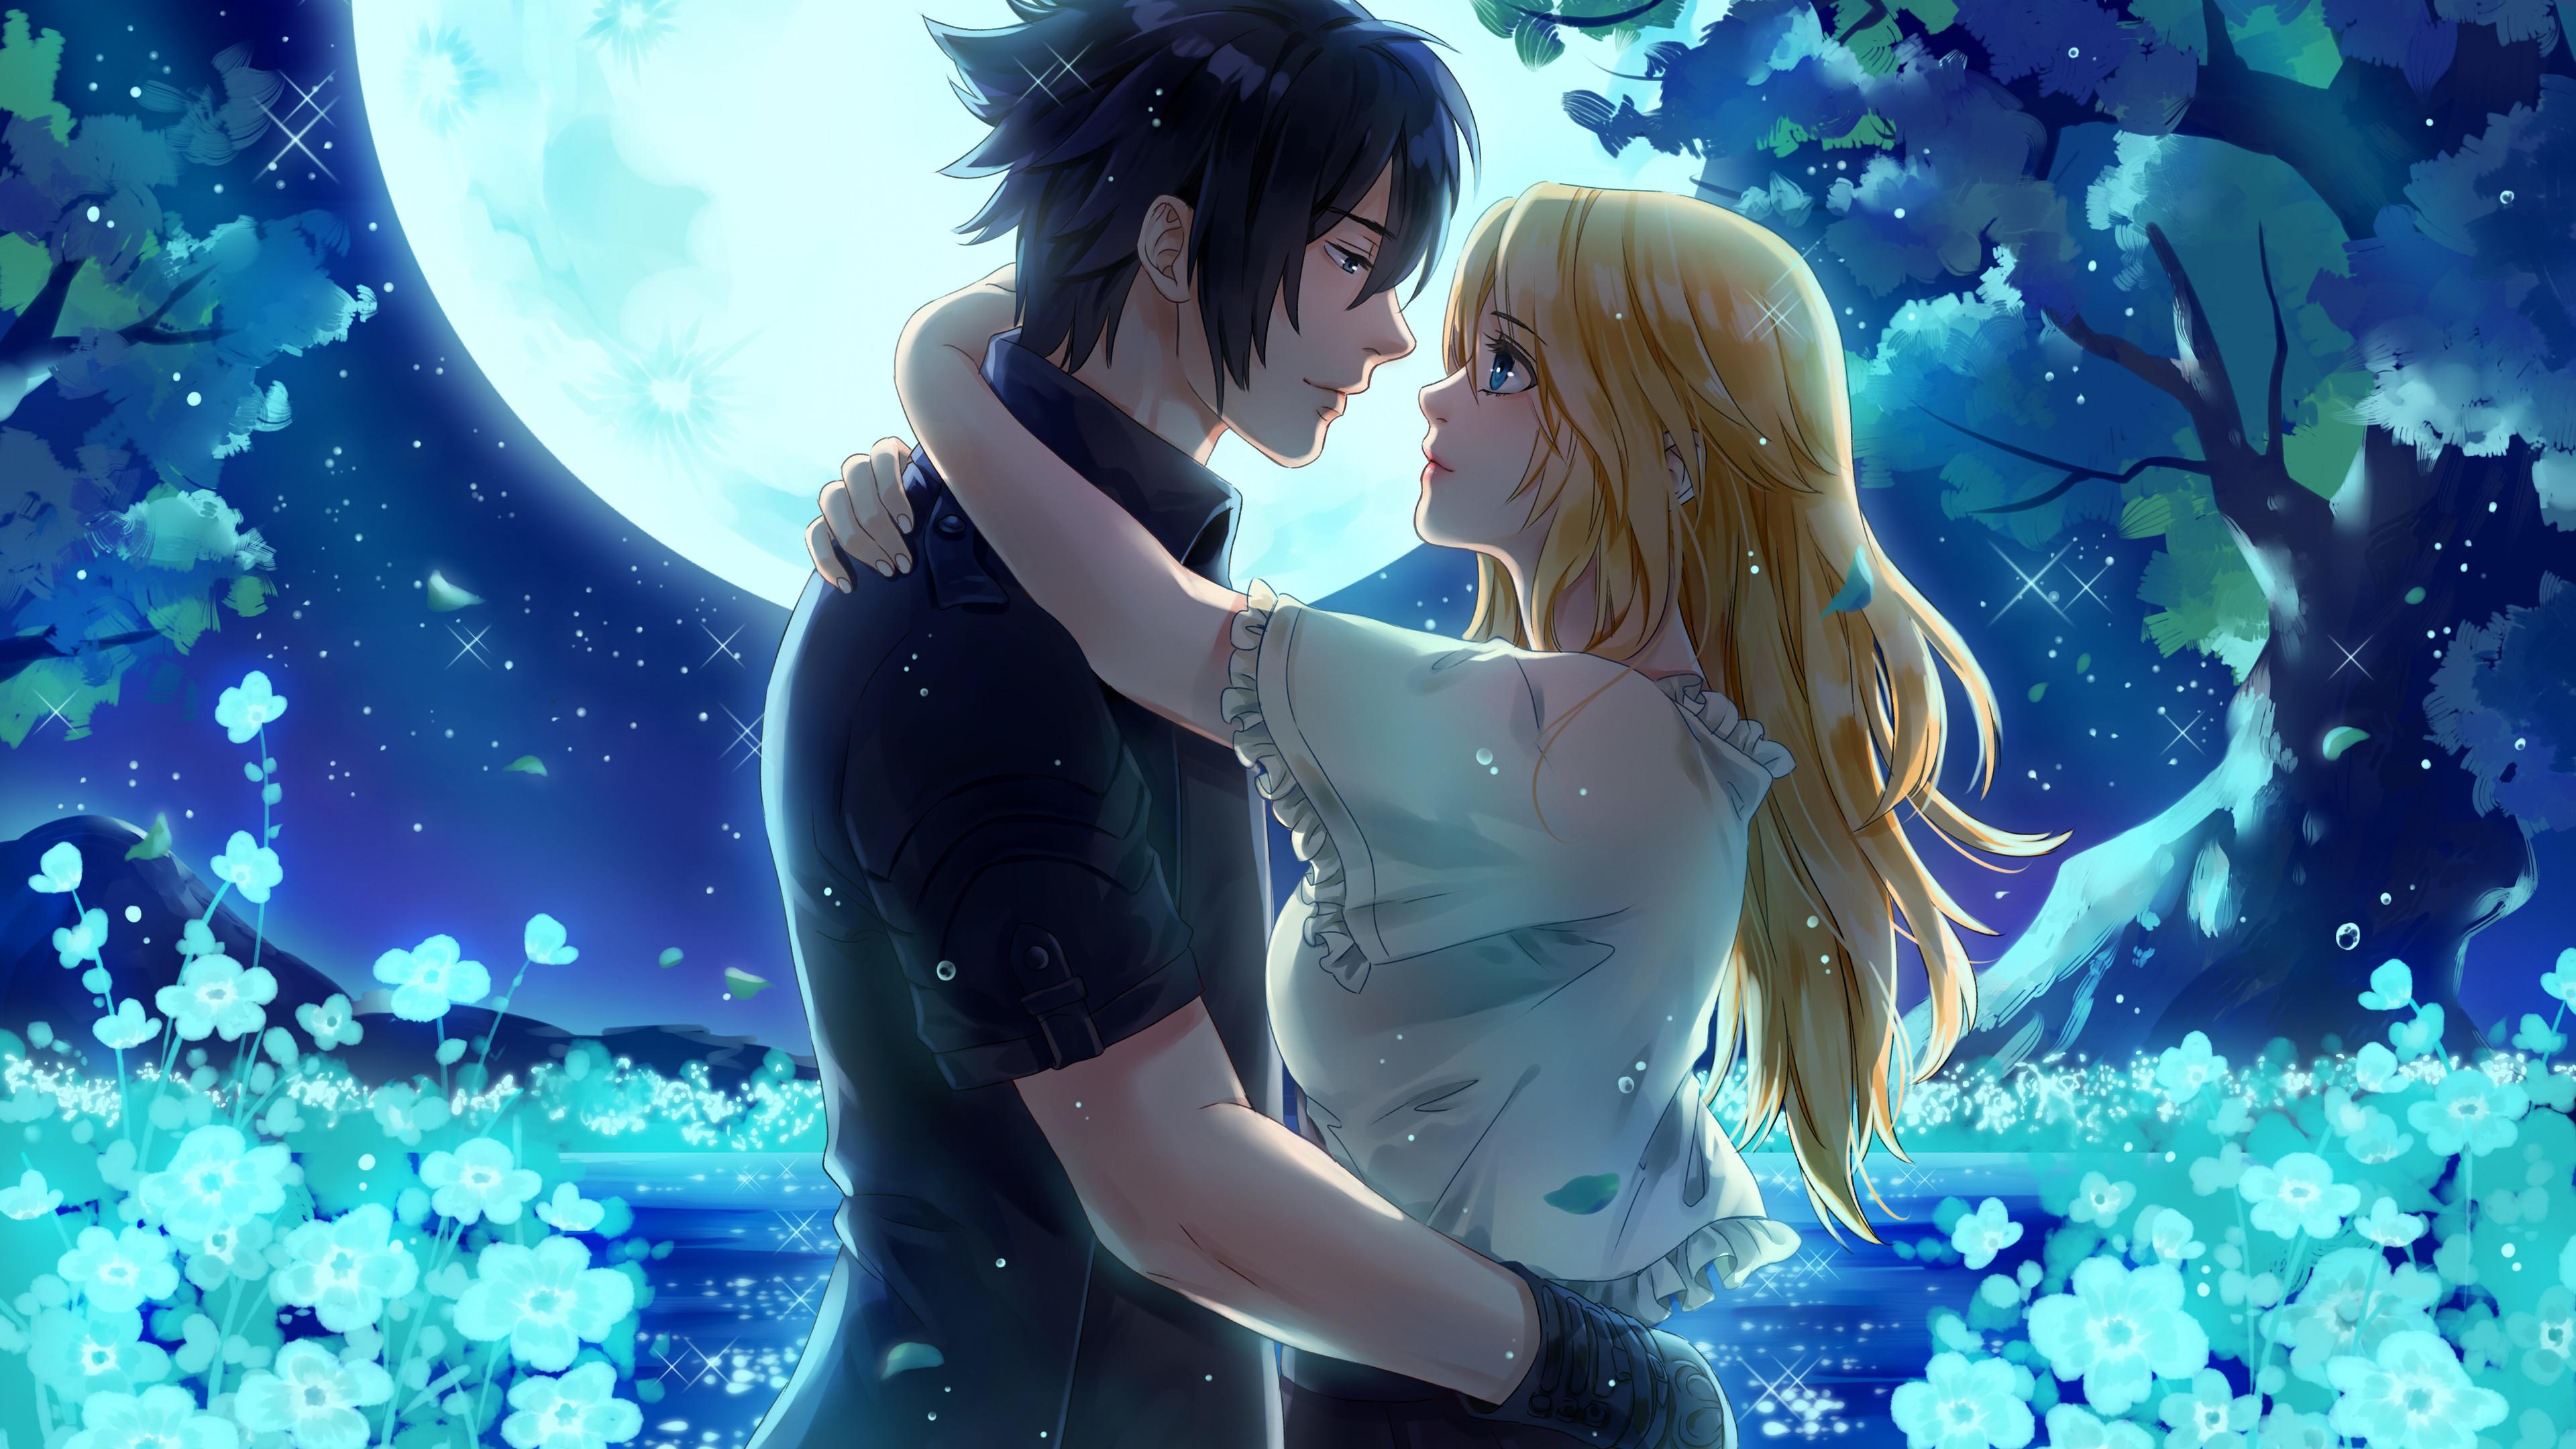 3840 x 2160 · jpeg - Noctis And Stella From Final Fantasy XV Under The Moon 4k love ...